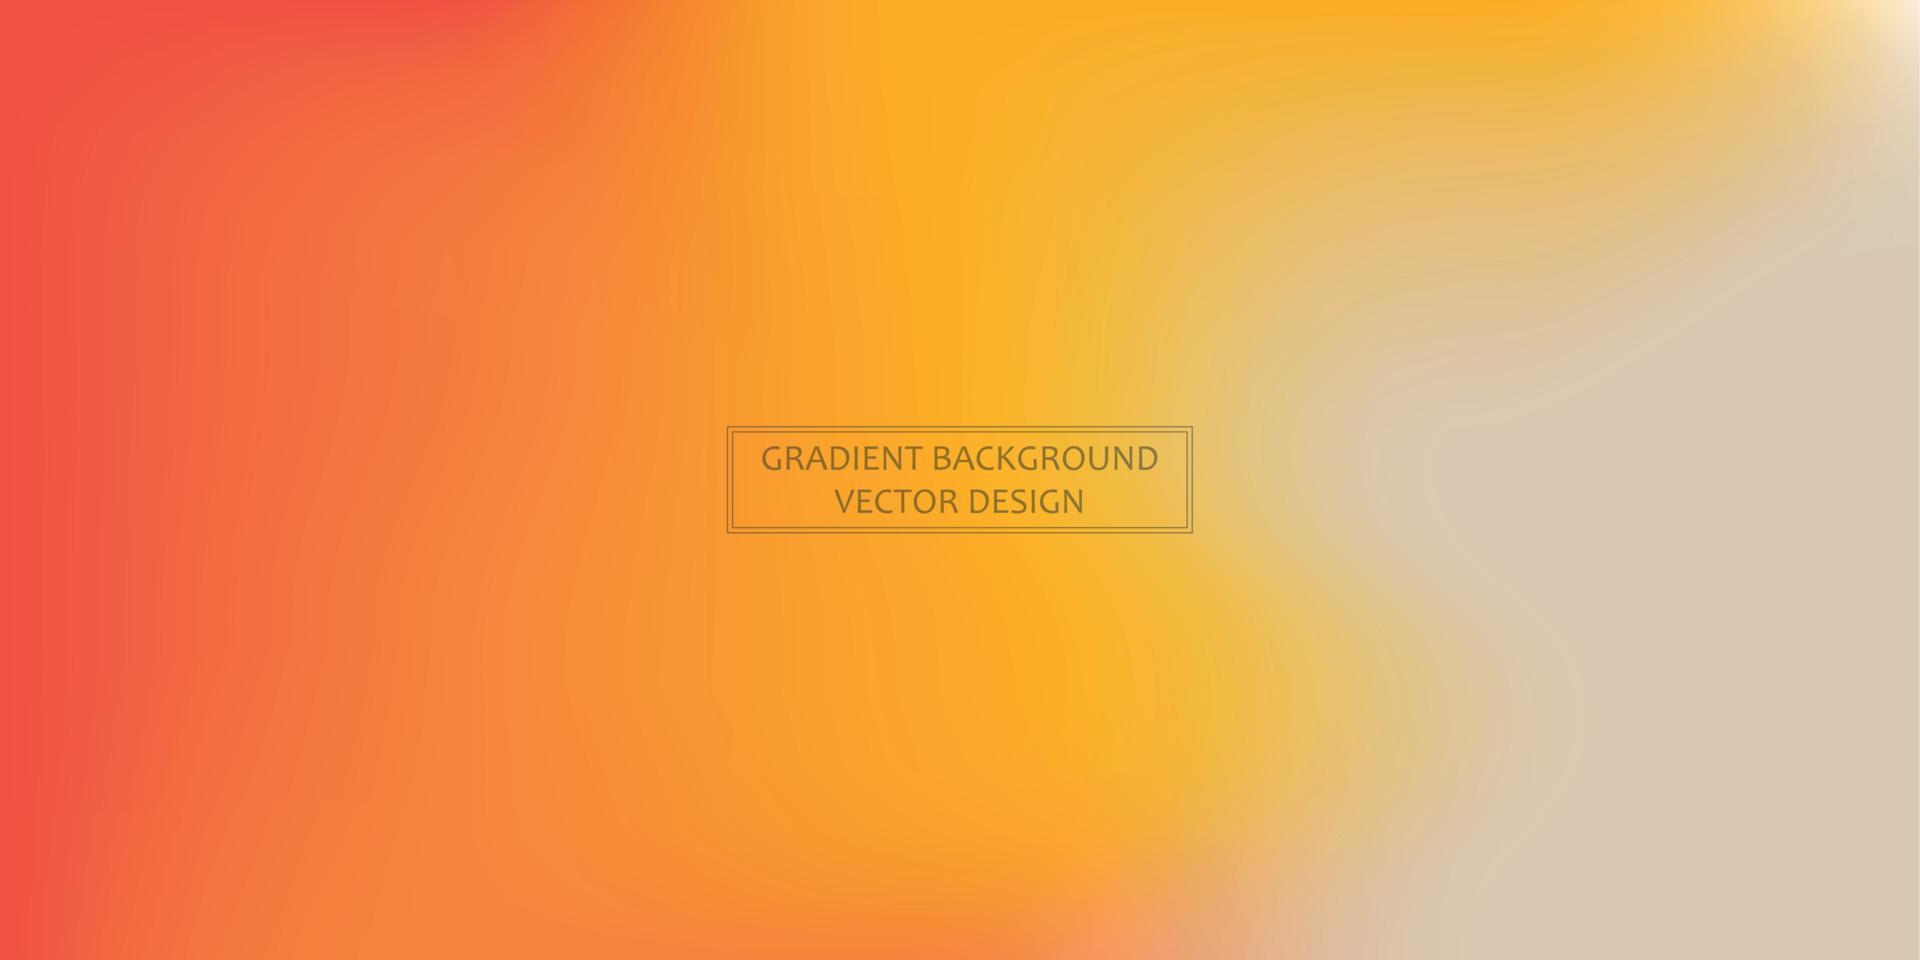 Panoramic web template multicolor gradient background, stylish design element - Vector